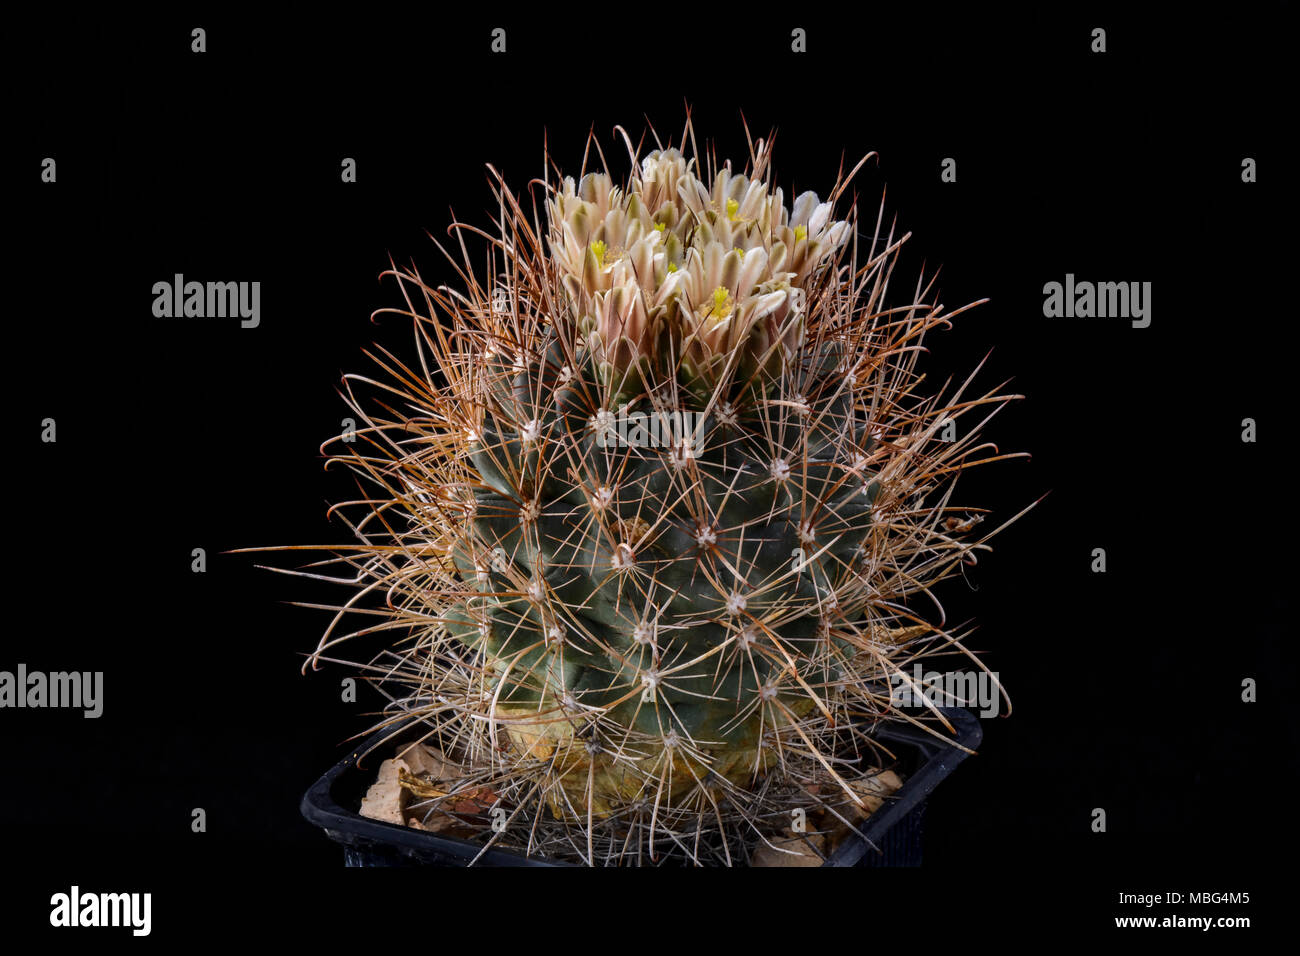 Cactus Ancistrocactus brevihamatus with flowers isolated on black Stock Photo